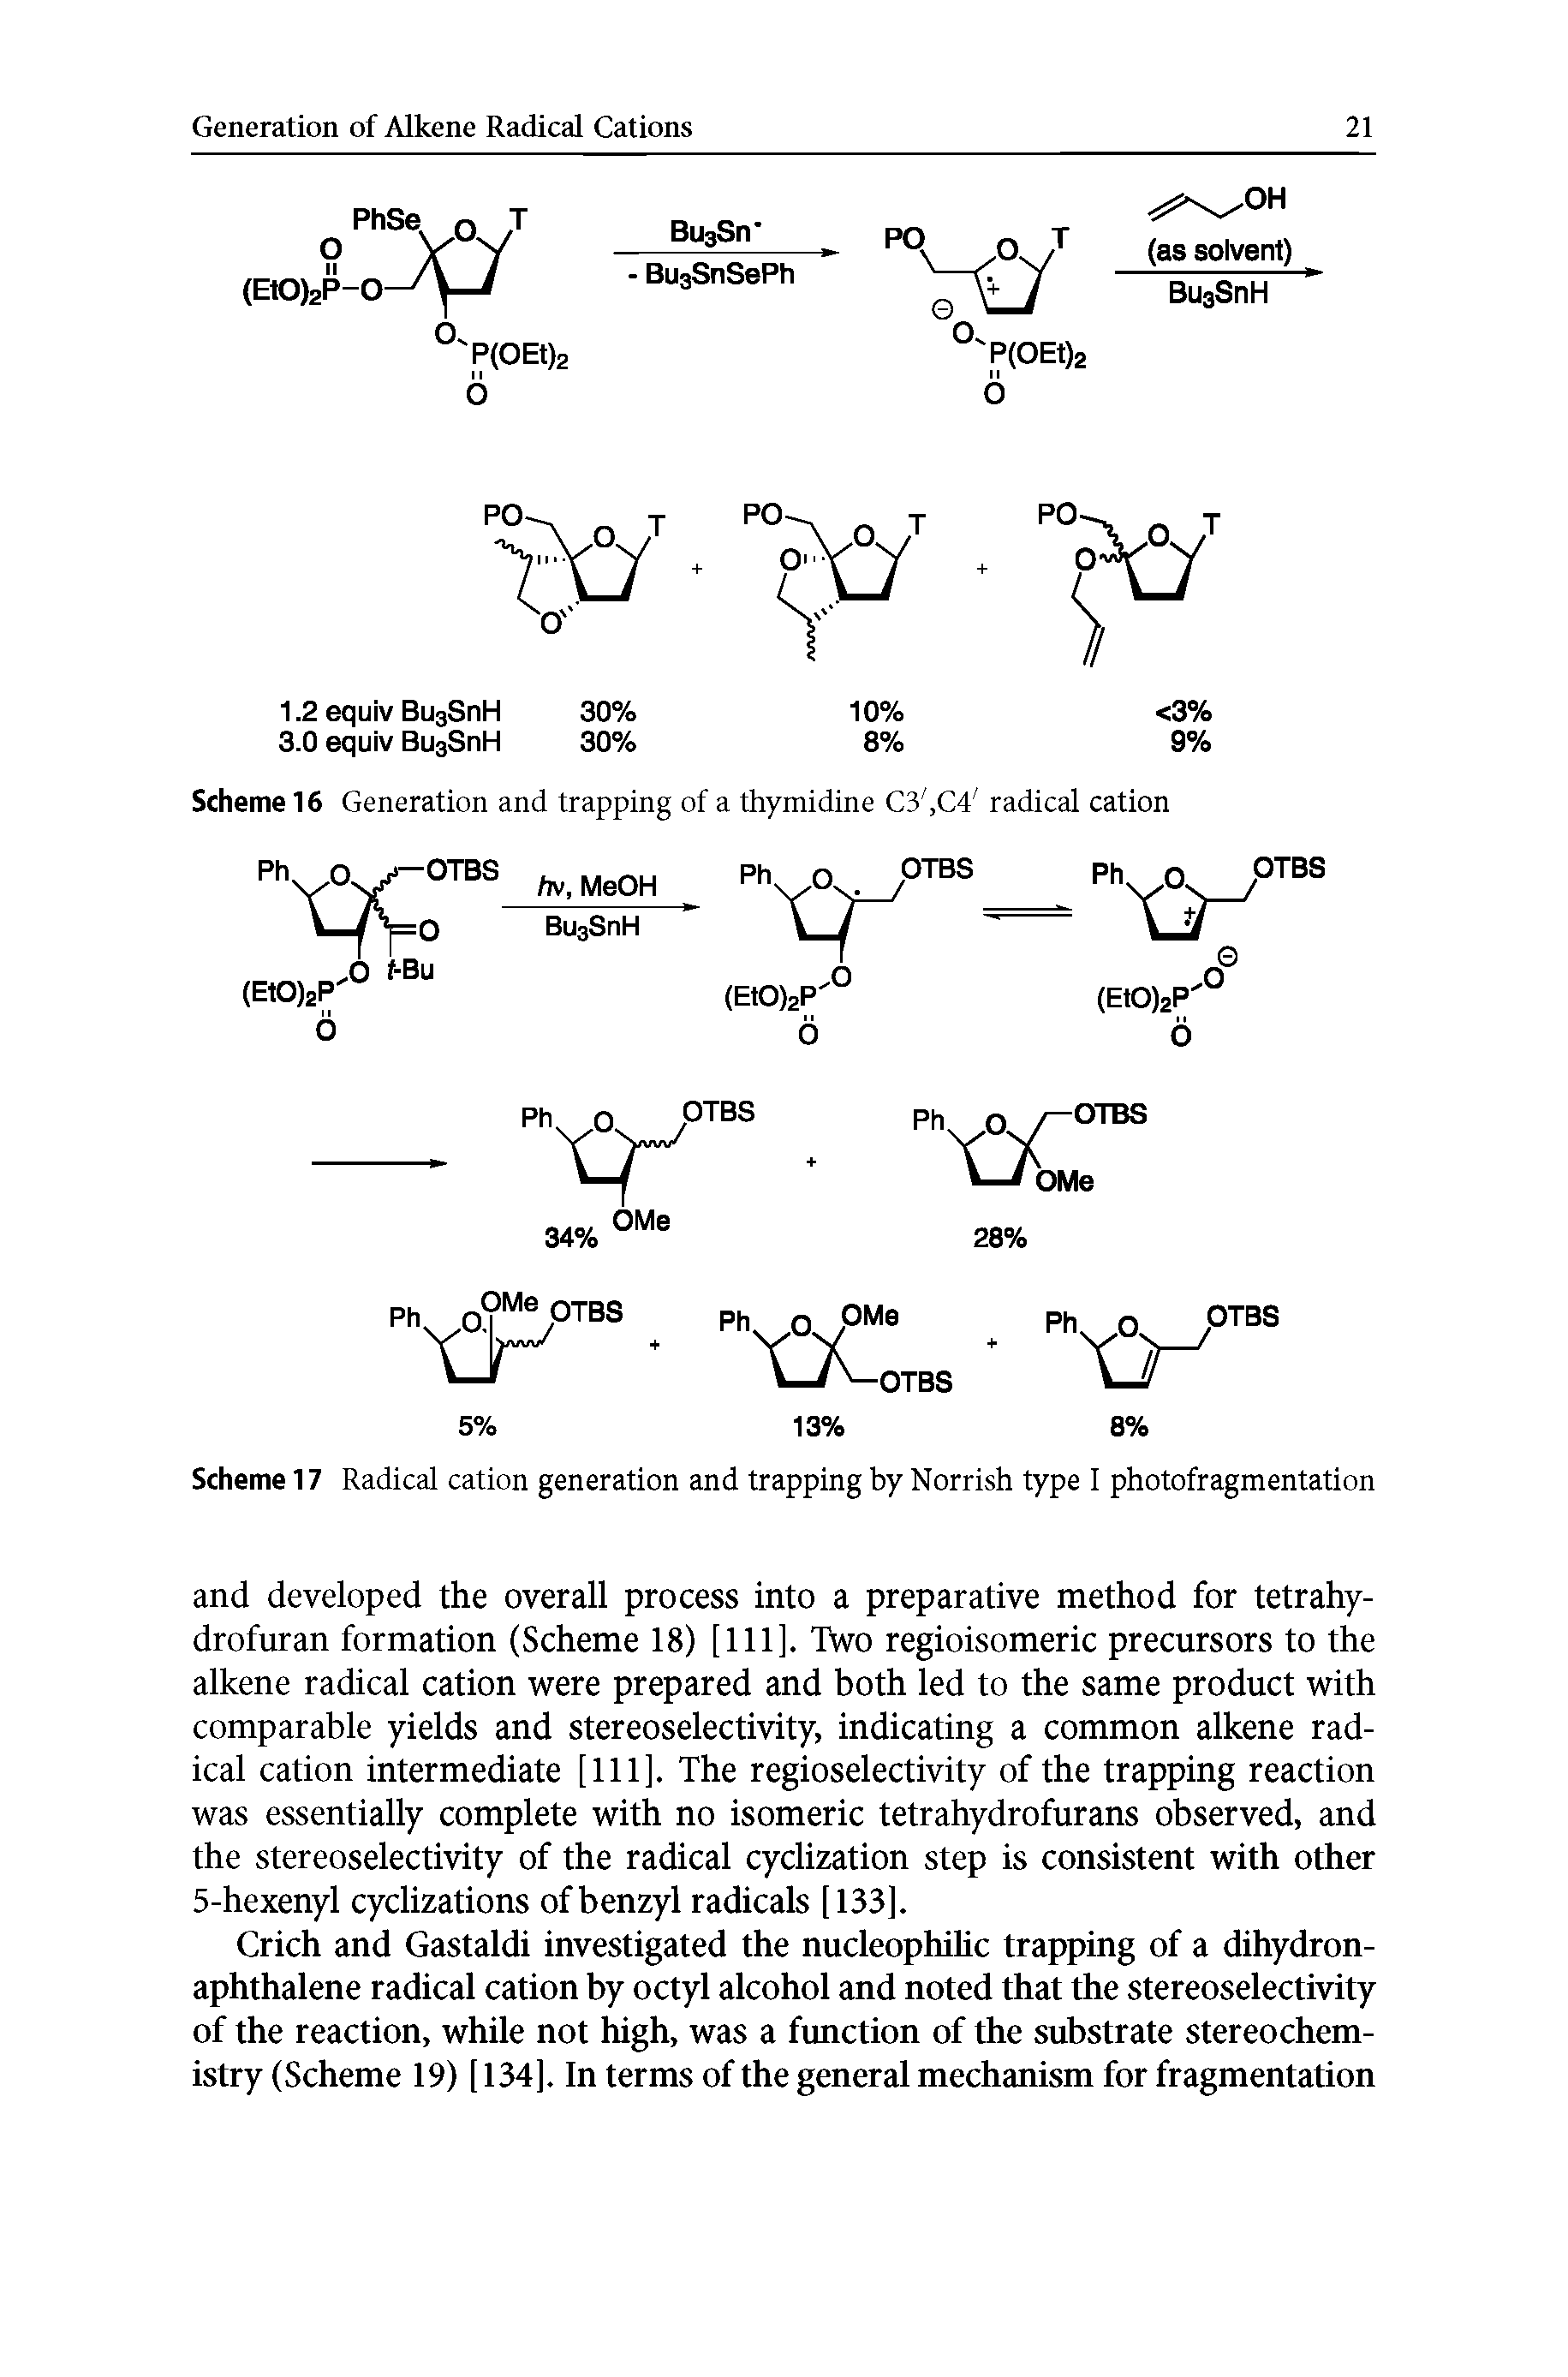 Scheme 16 Generation and trapping of a thymidine C3, C4 radical cation...